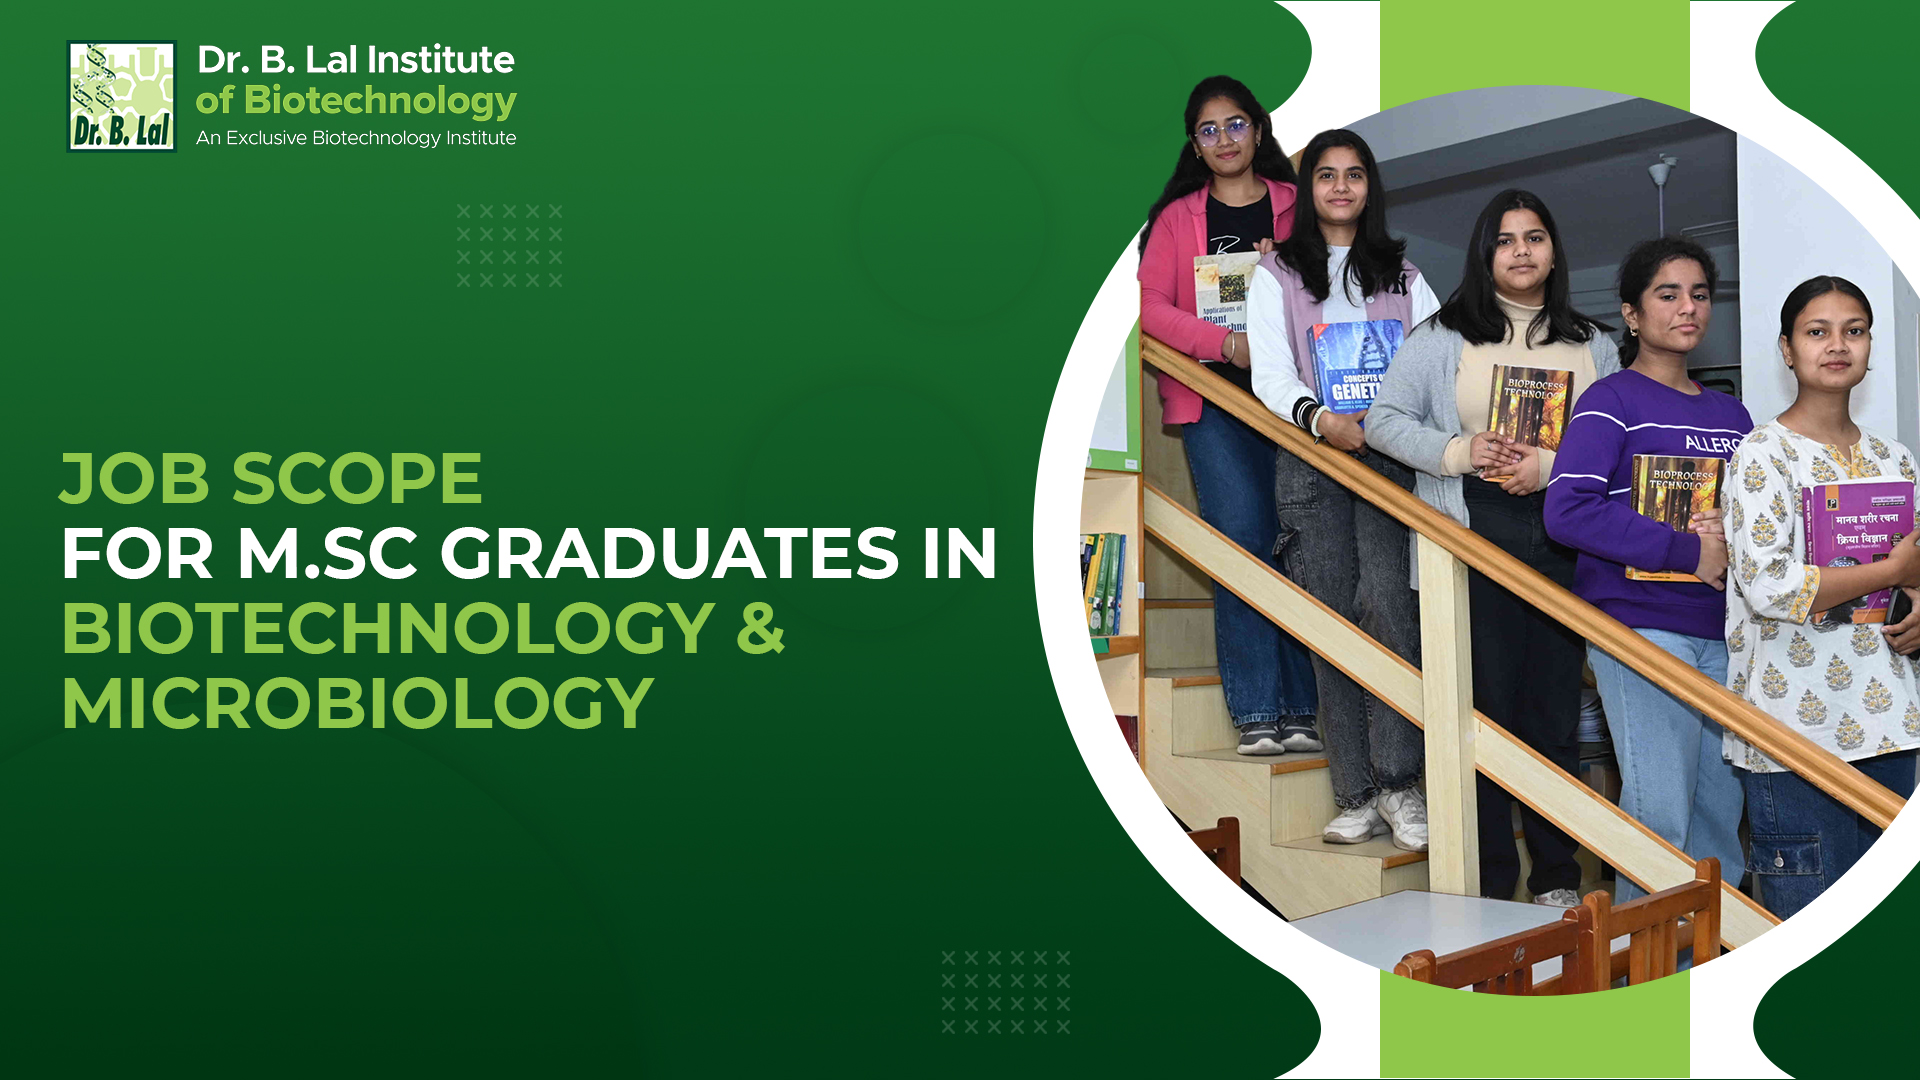 Job Scope for M.Sc in Biotechnology & Microbiology Graduates